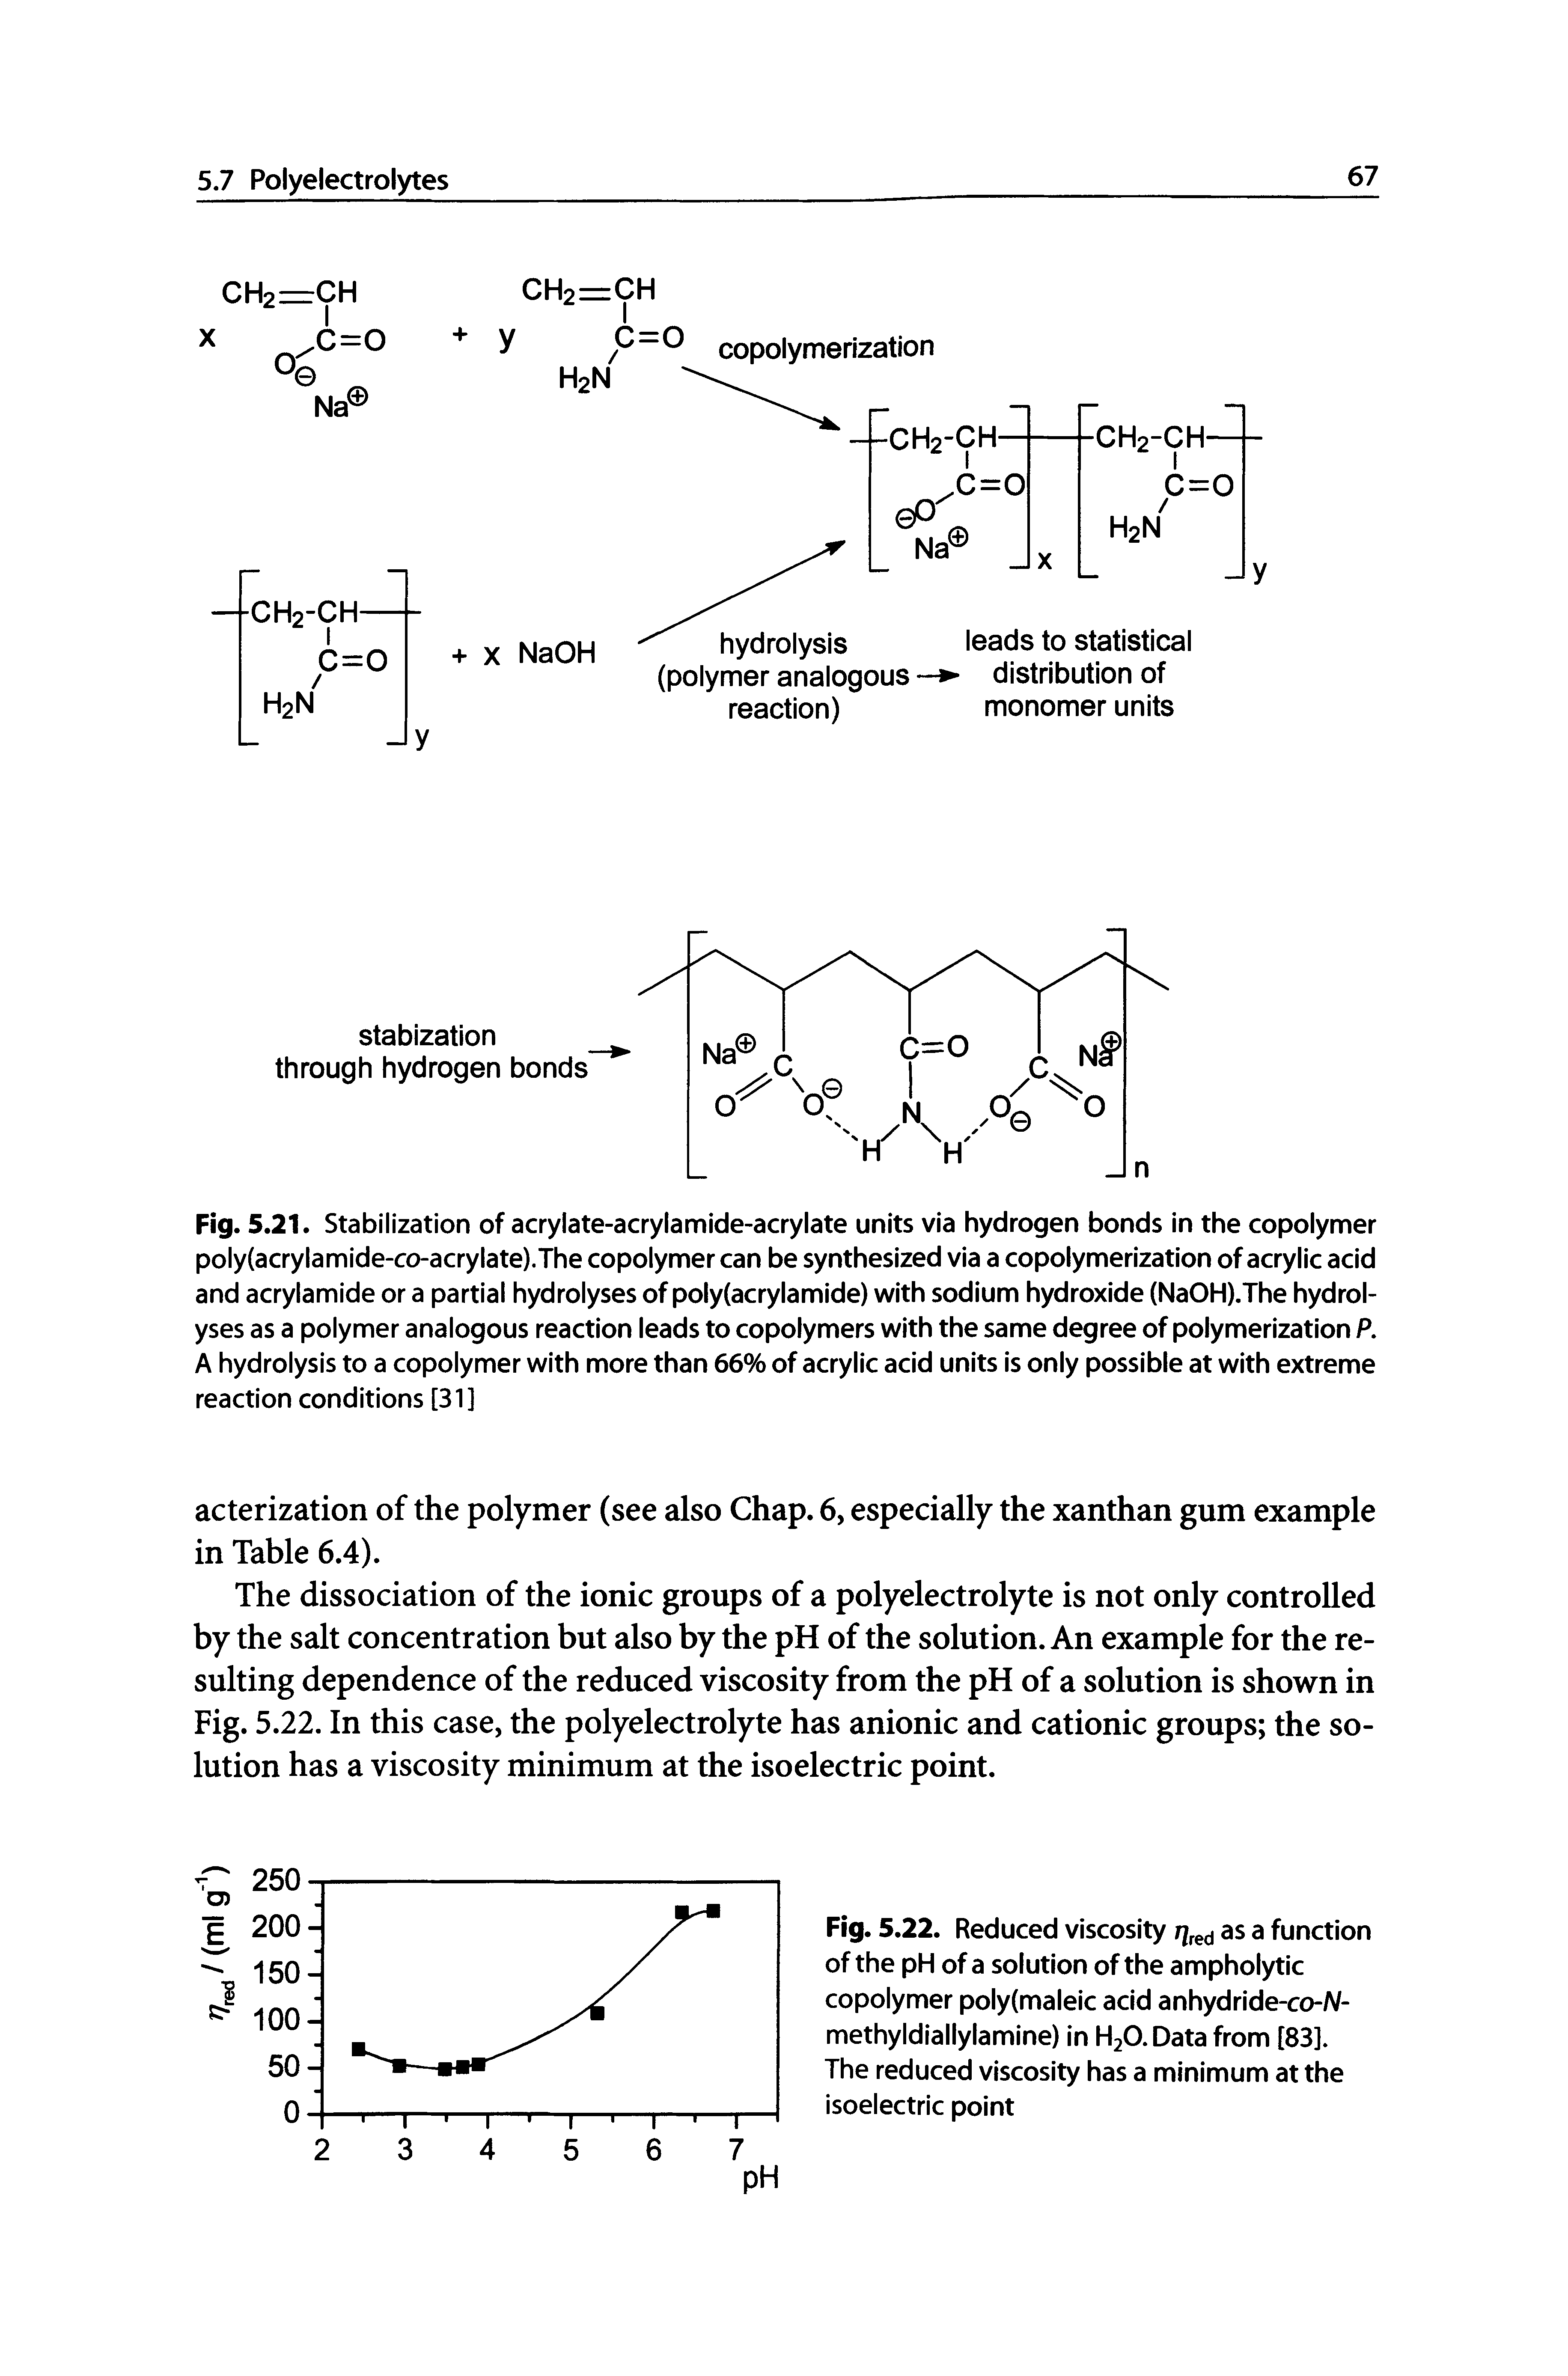 Fig. 5.21. Stabilization of acrylate-acrylamide-acrylate units via hydrogen bonds in the copolymer poly(acrylamide-co-acrylate).The copolymer can be synthesized via a copolymerization of acrylic acid and acrylamide or a partial hydrolyses of poly(acrylamlde) with sodium hydroxide (NaOH).The hydrolyses as a polymer analogous reaction leads to copolymers with the same degree of polymerization P. A hydrolysis to a copolymer with more than 66% of acrylic acid units is only possible at with extreme reaction conditions [31]...